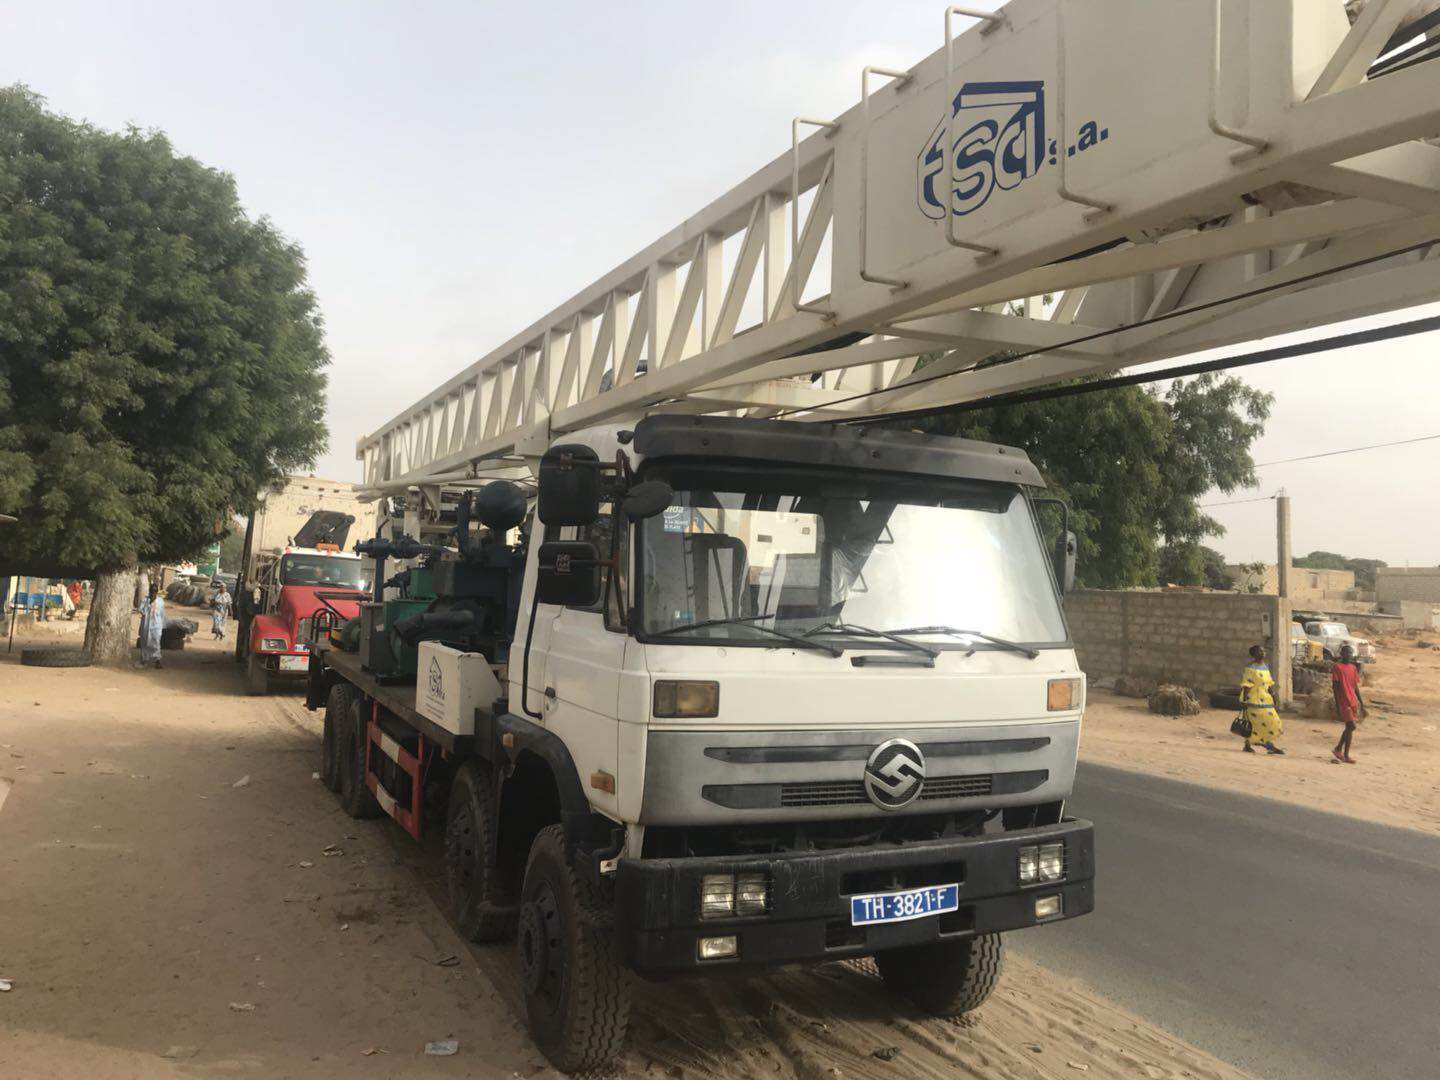 BZC600CAtruck mounted water well drilling rig drill the water well successfully in Senegal.